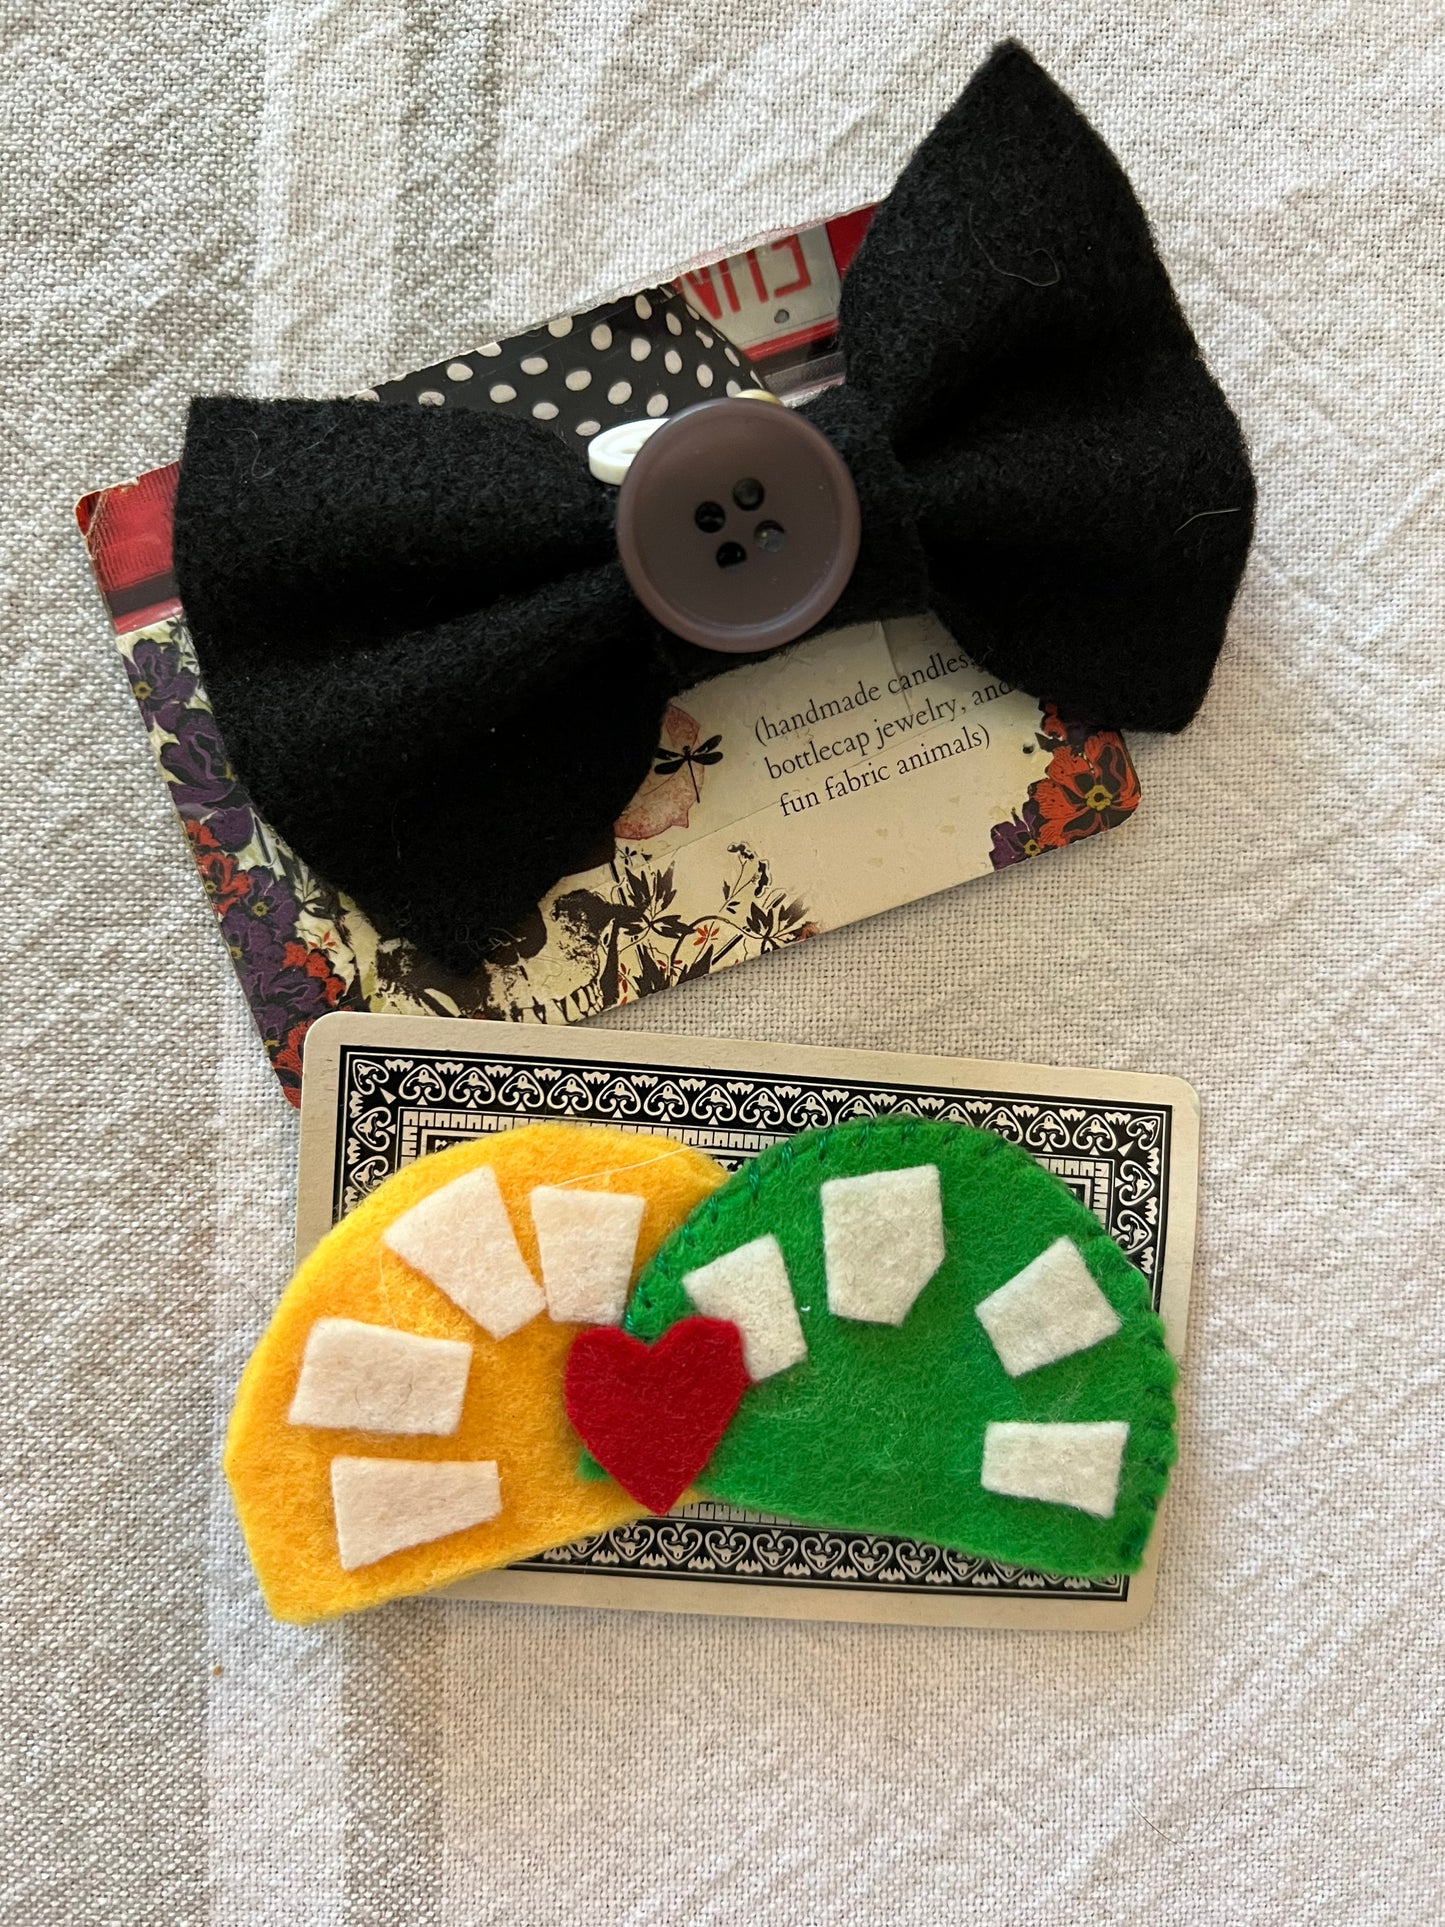 Hair Clip Set - Handmade Fruit Clips or Bows - Choose Your Own!